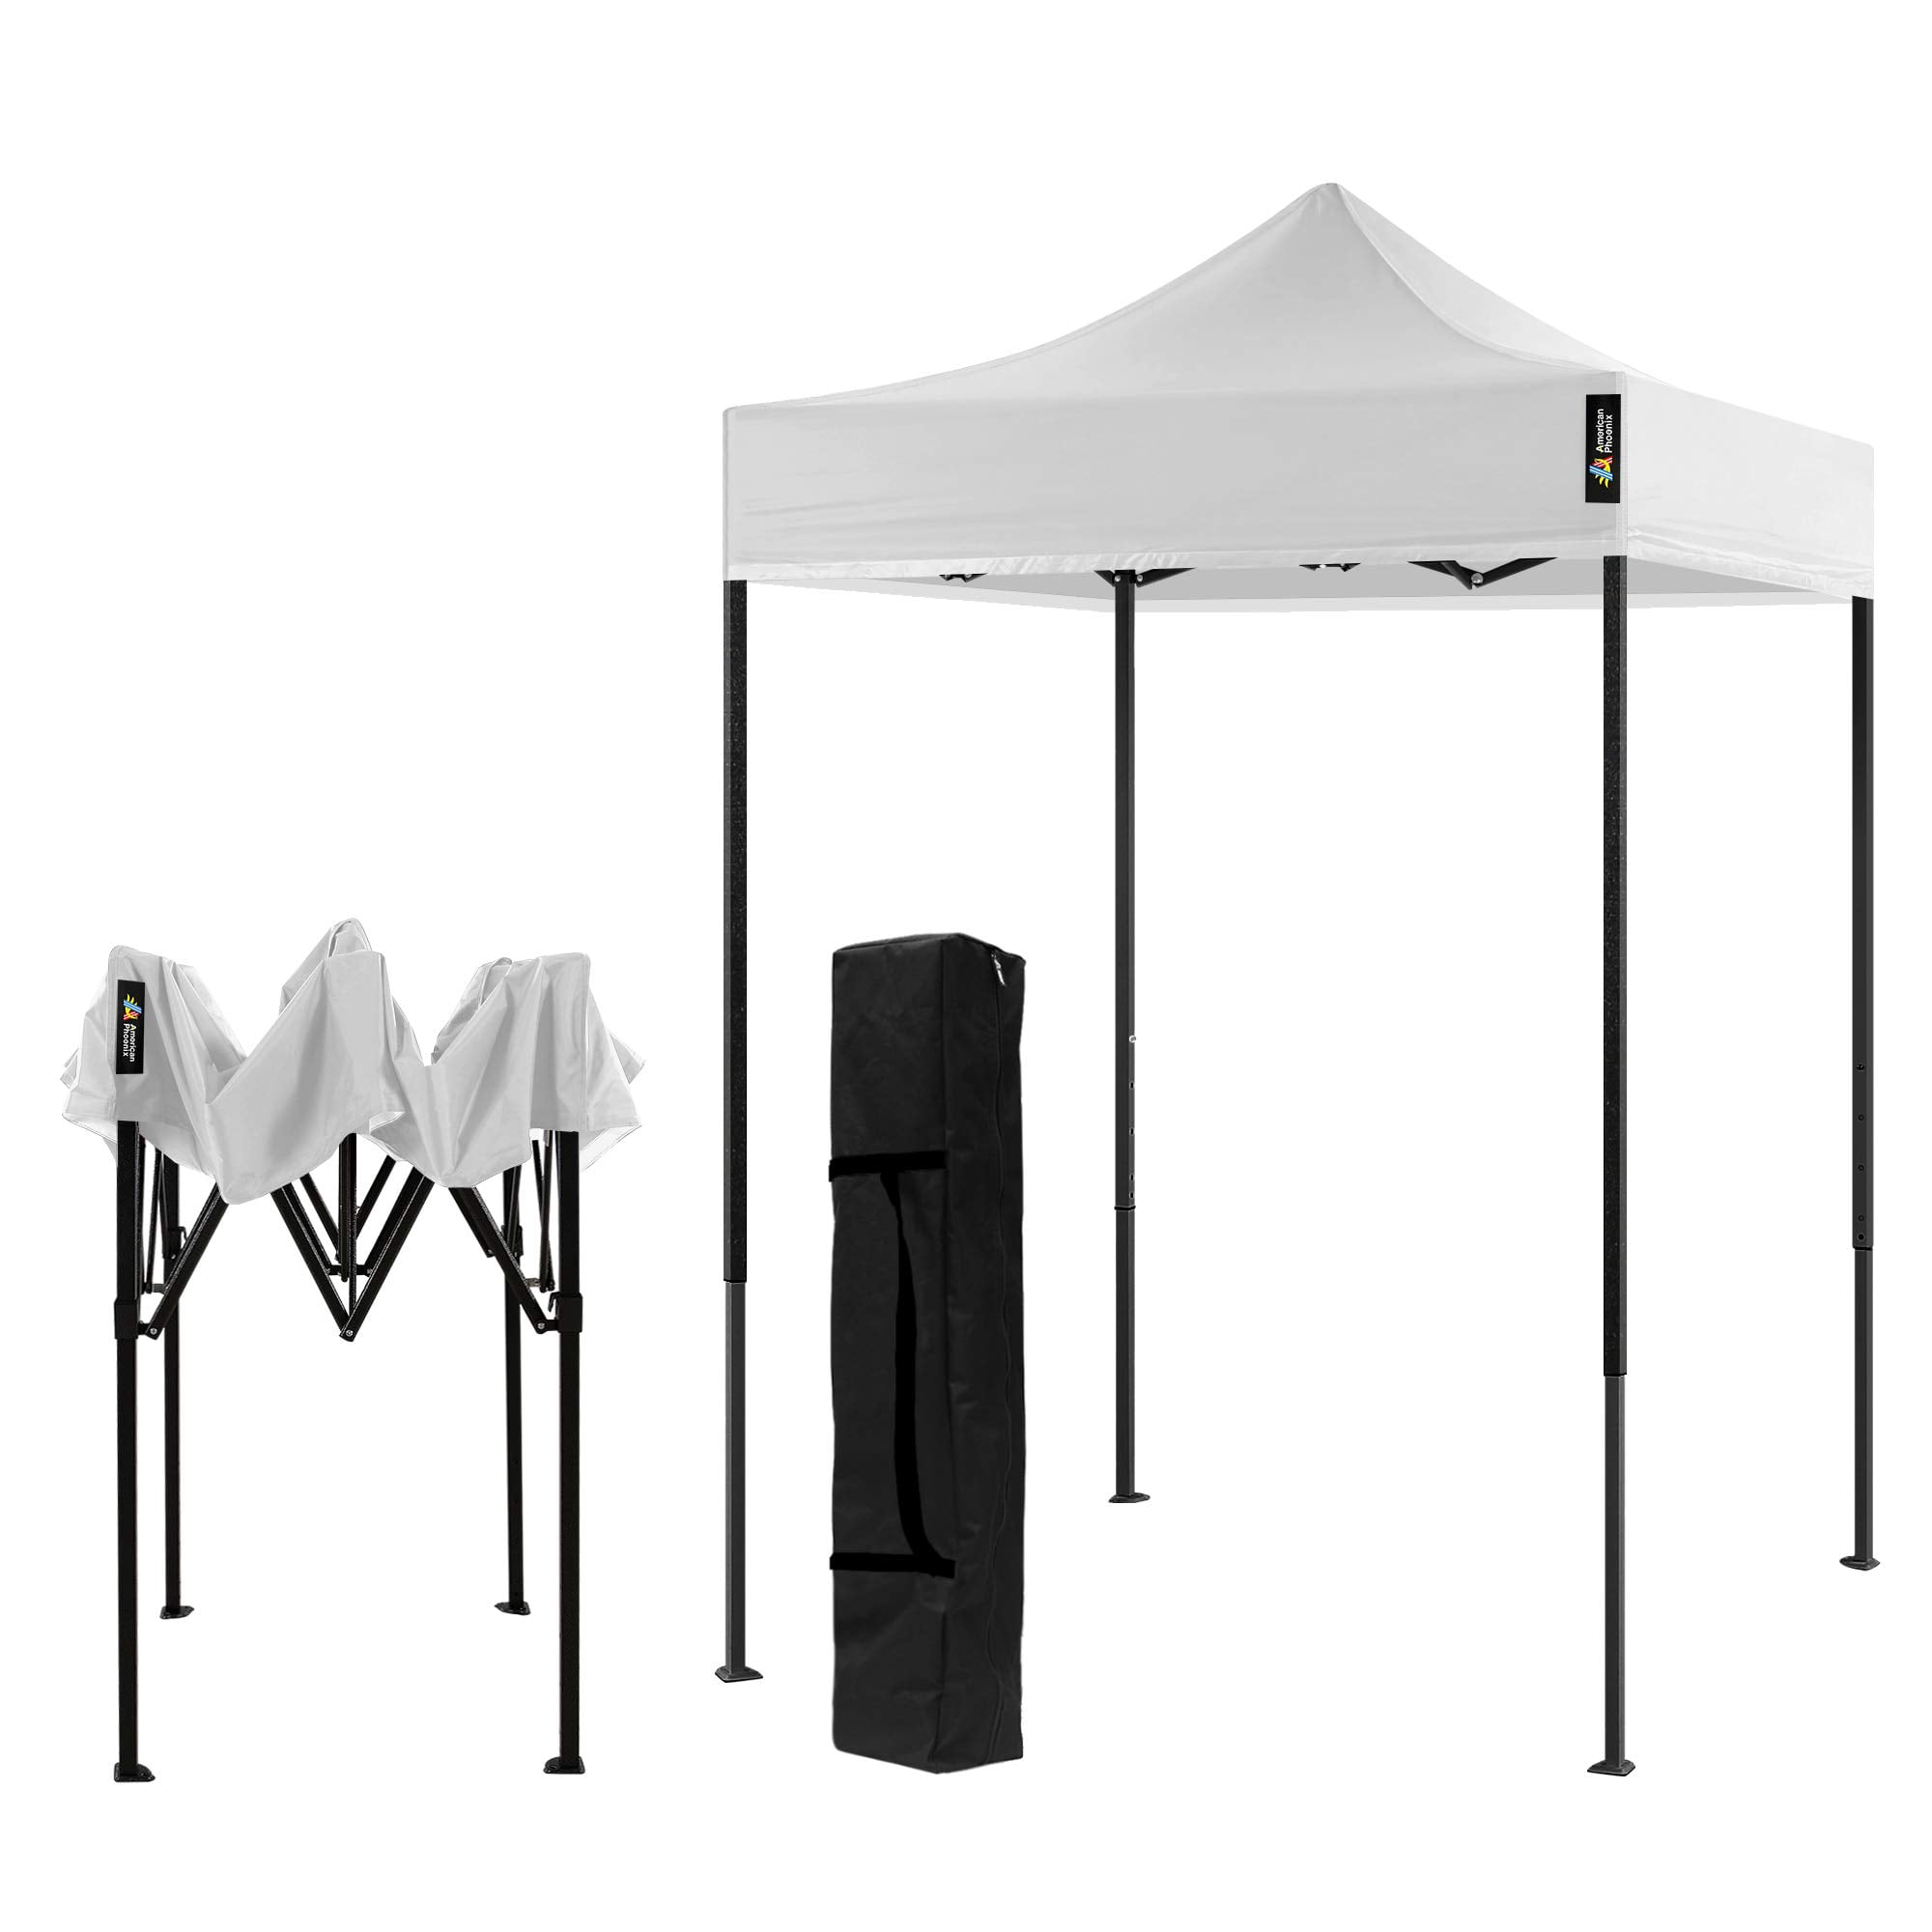 Black Frame , White AMERICAN PHOENIX 10x10 Pop Up Canopy Tent Portable Instant Commercial Tent Heavy Duty Outdoor Market Shelter 10x10 